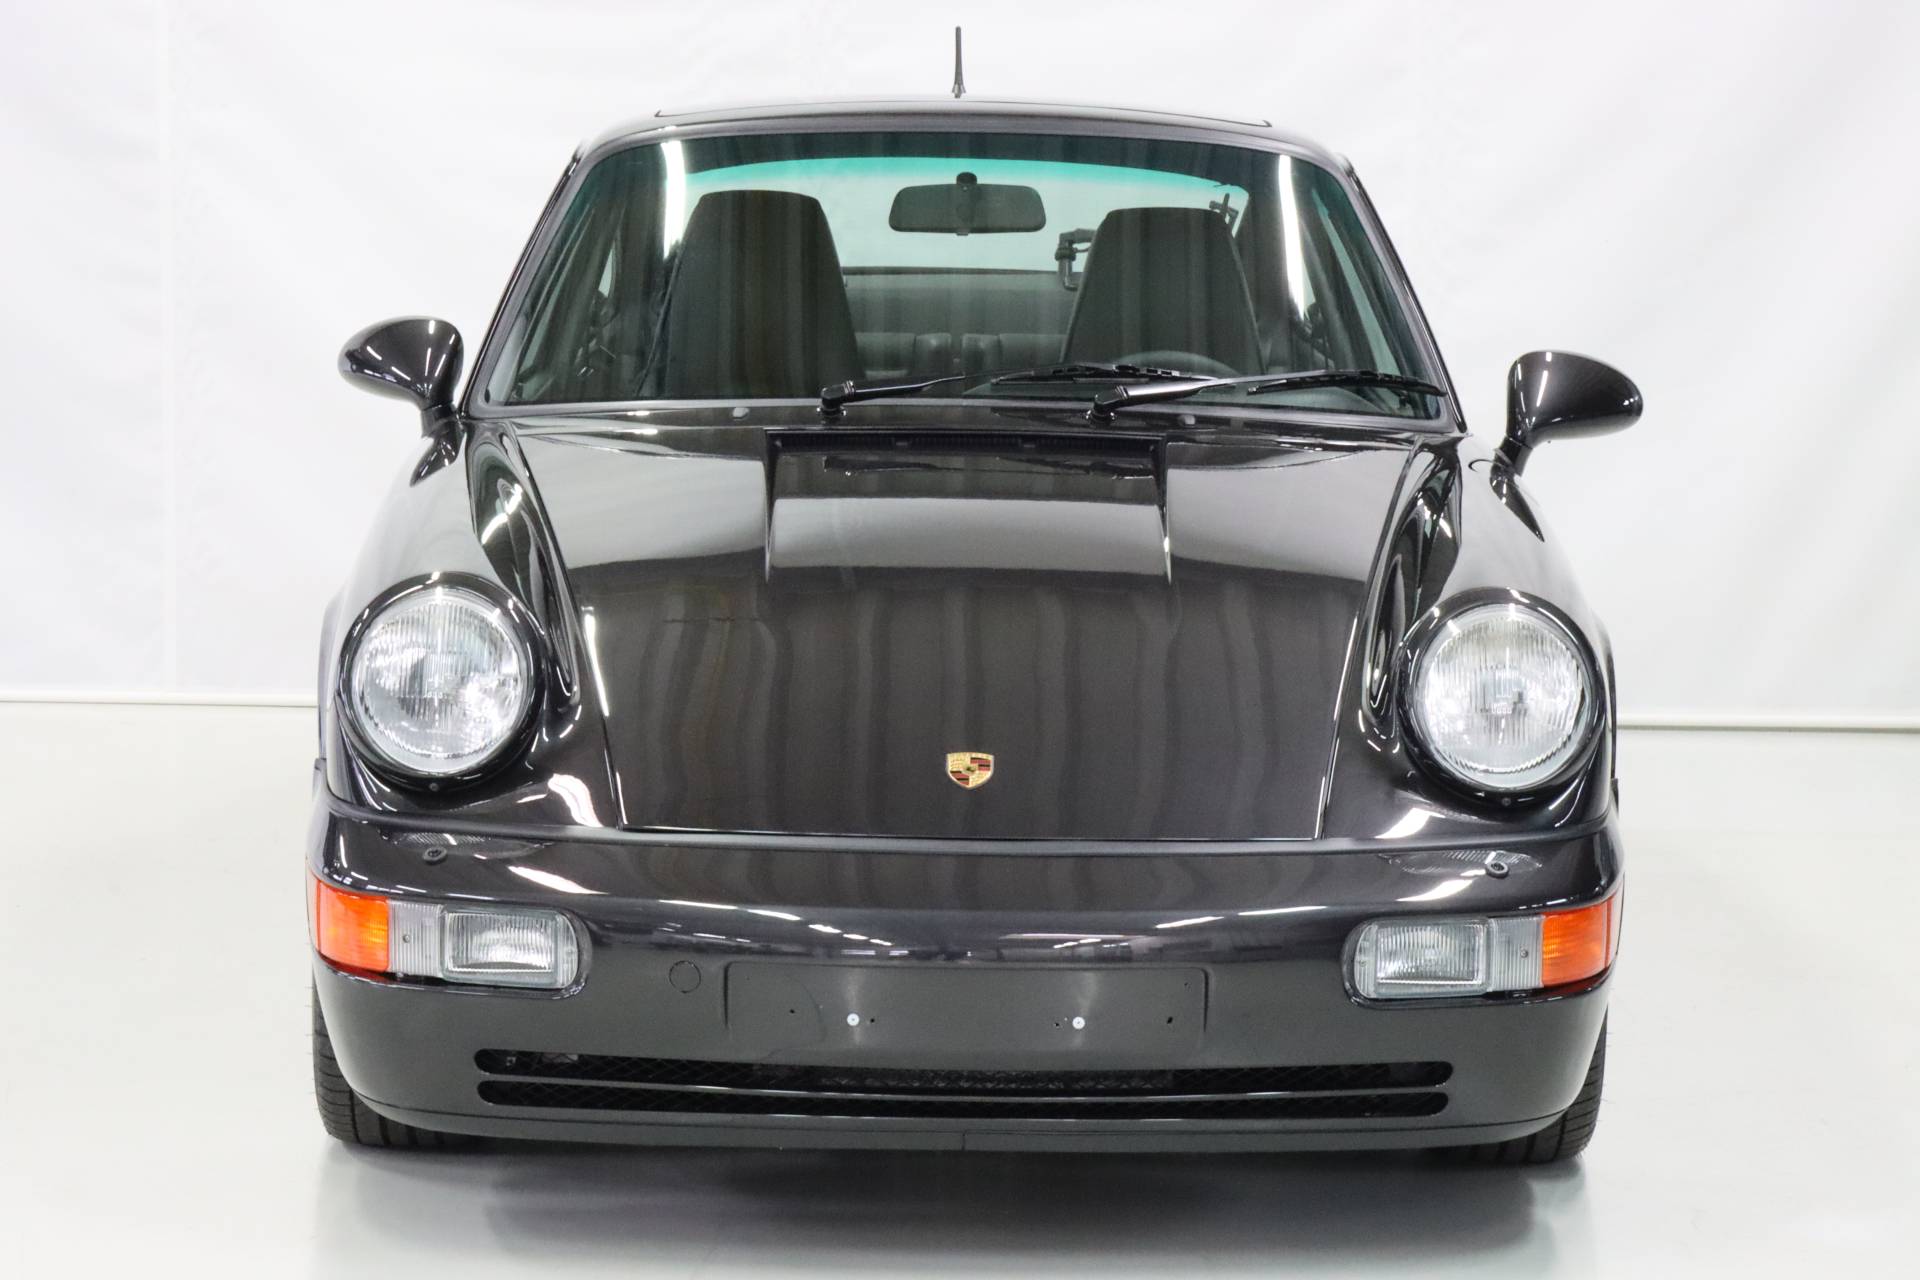 For Sale: Porsche 911 Carrera 4 (1990) offered for Price on request